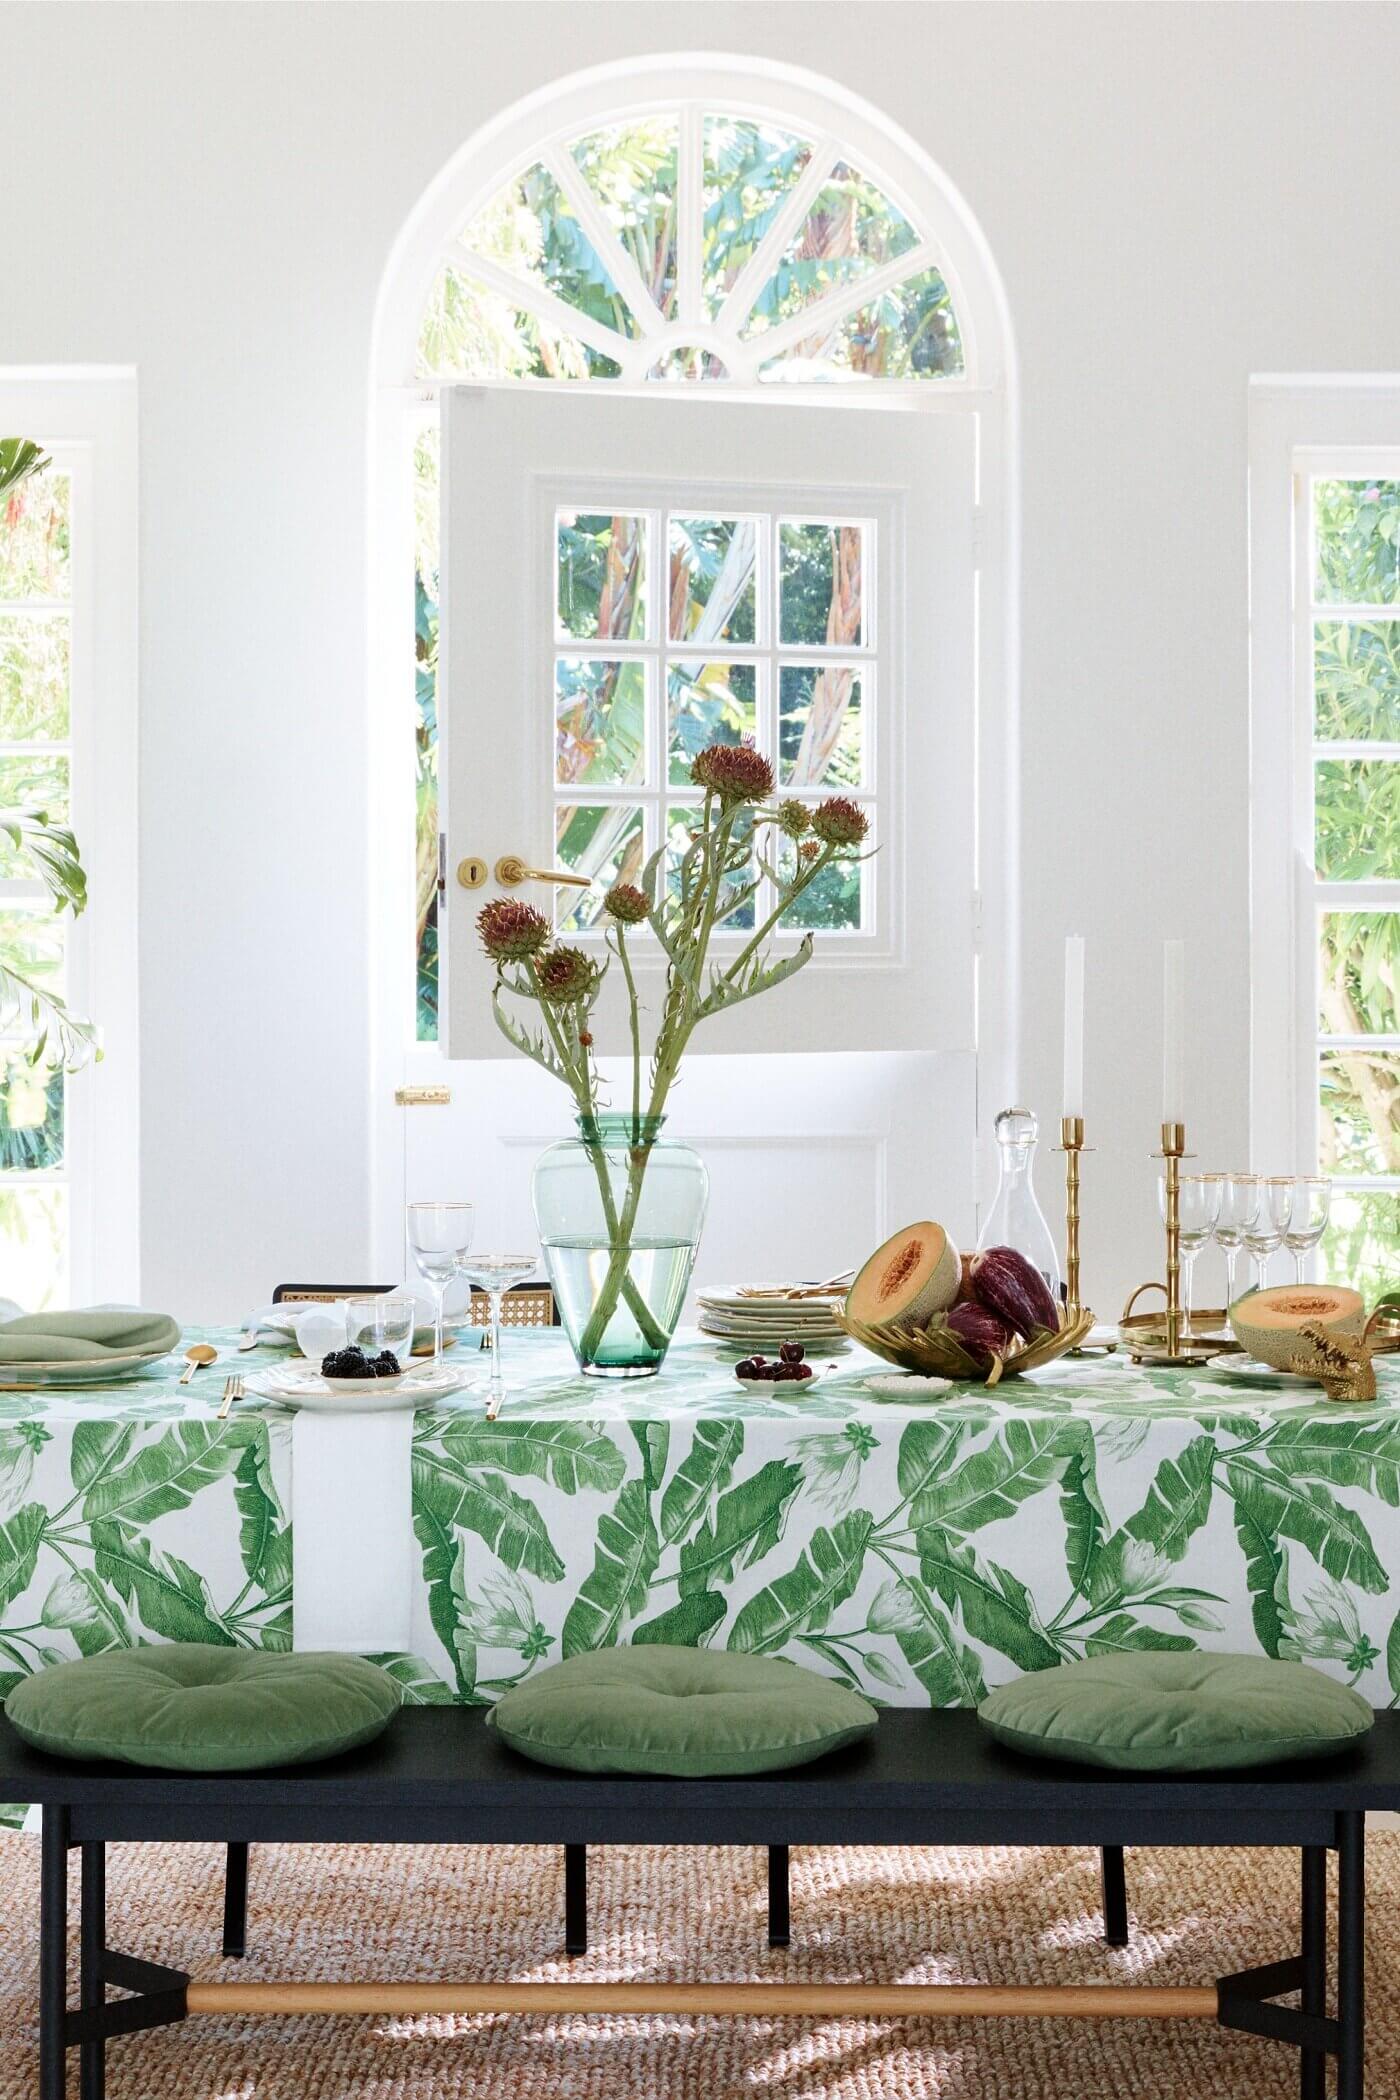 hm home spring collection nordroom8 The H&M Home Spring Collection Brings Nature Into Your Home